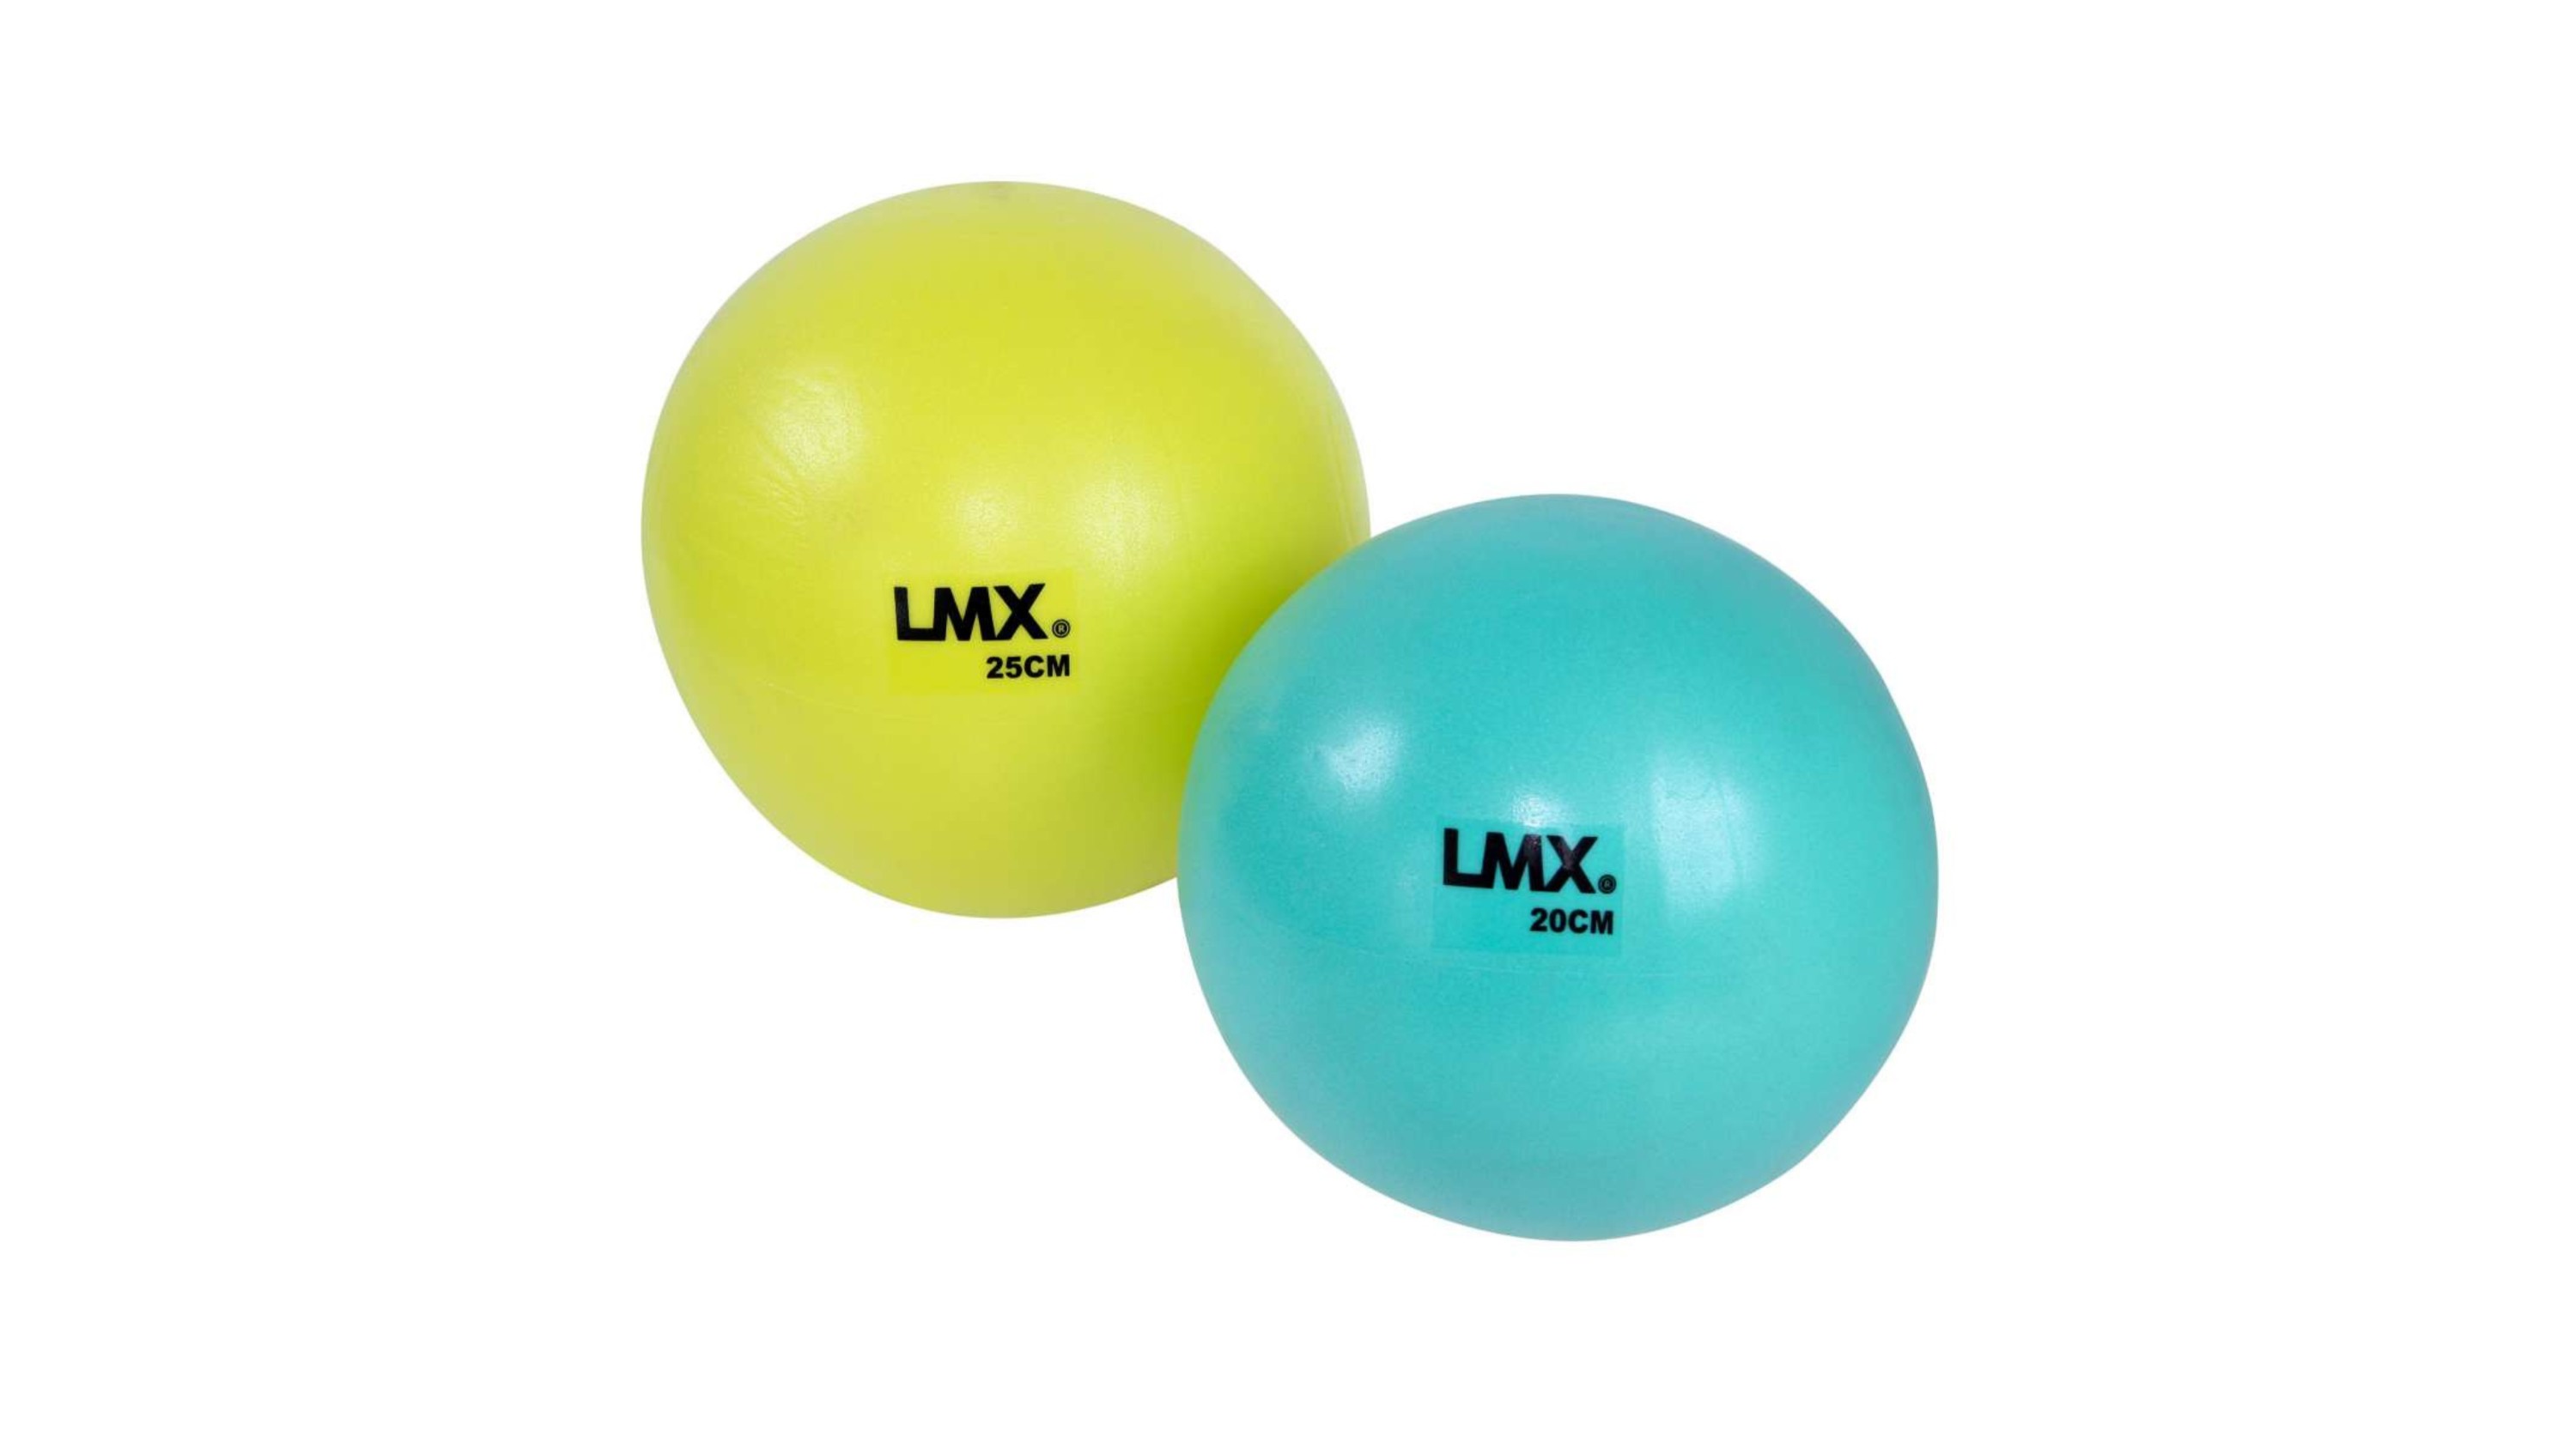 With this pilates ball you can increase the mobility and stability of various joints.
